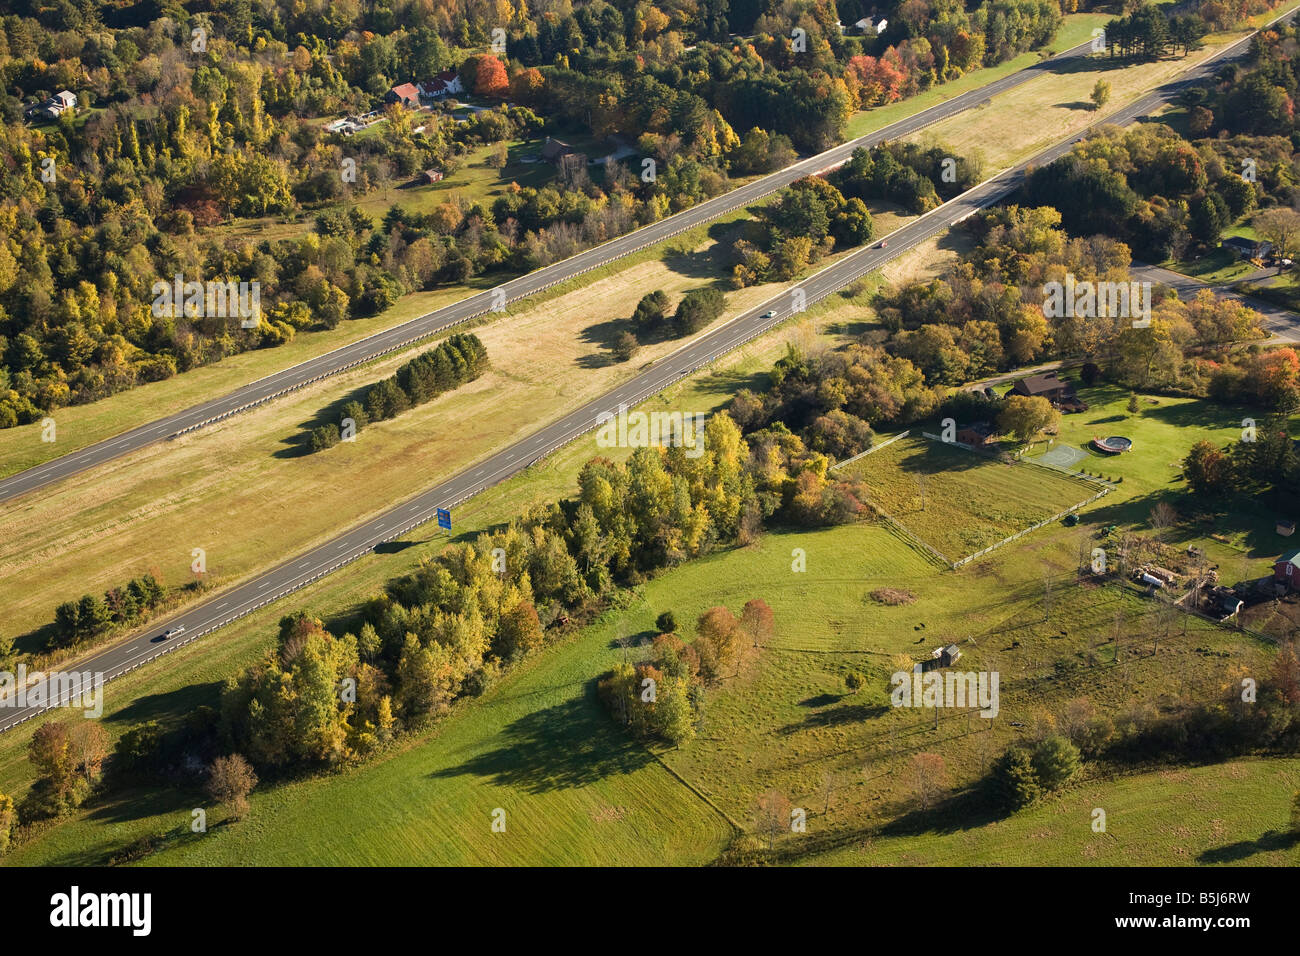 Massachusetts Turnpike running through Stockbridge Massachusetts on a fall morning View is looking south from a hot air balloon Stock Photo